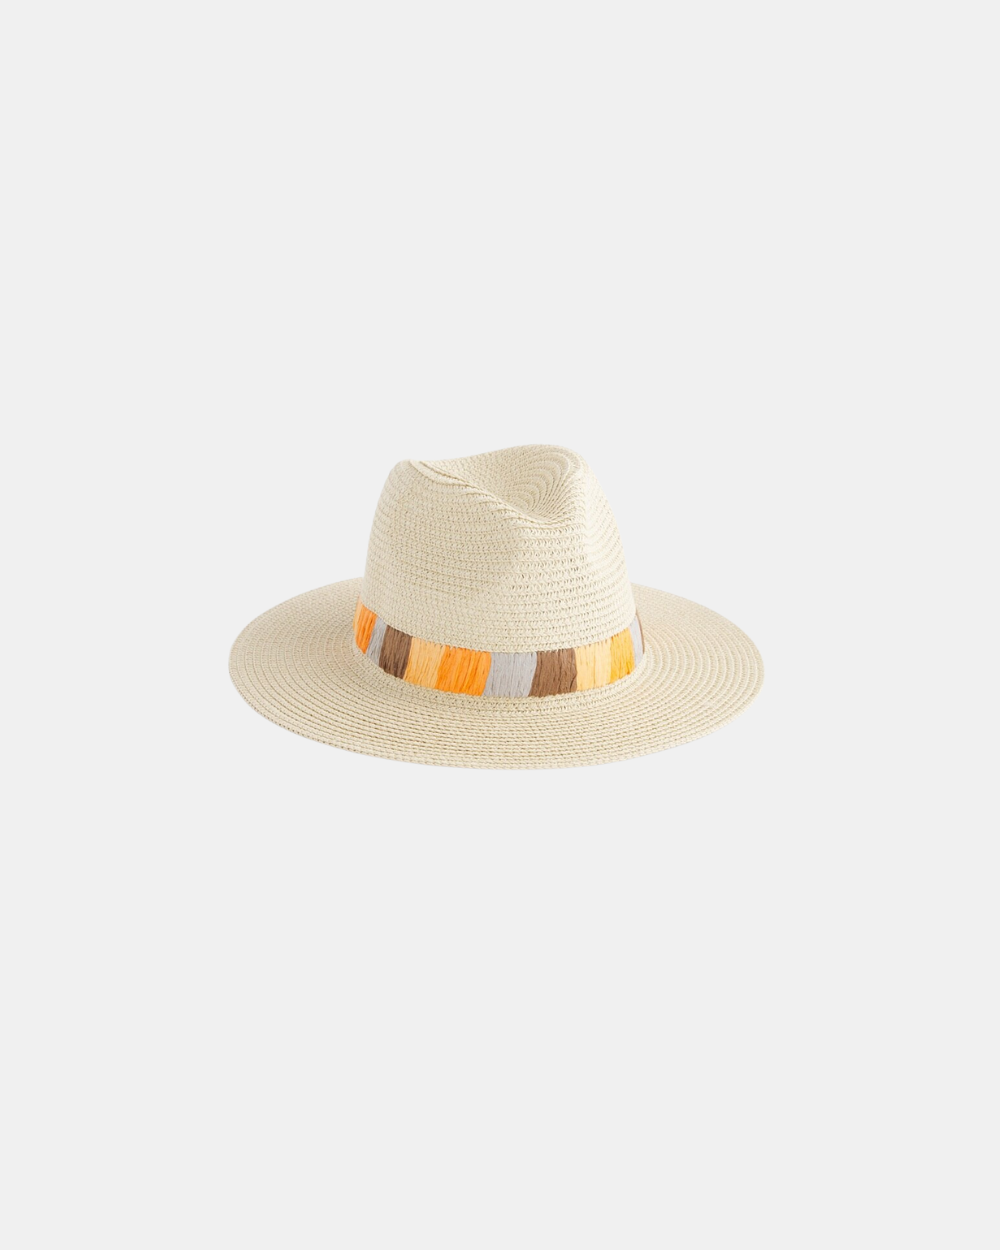 SUN HAT WITH BAND